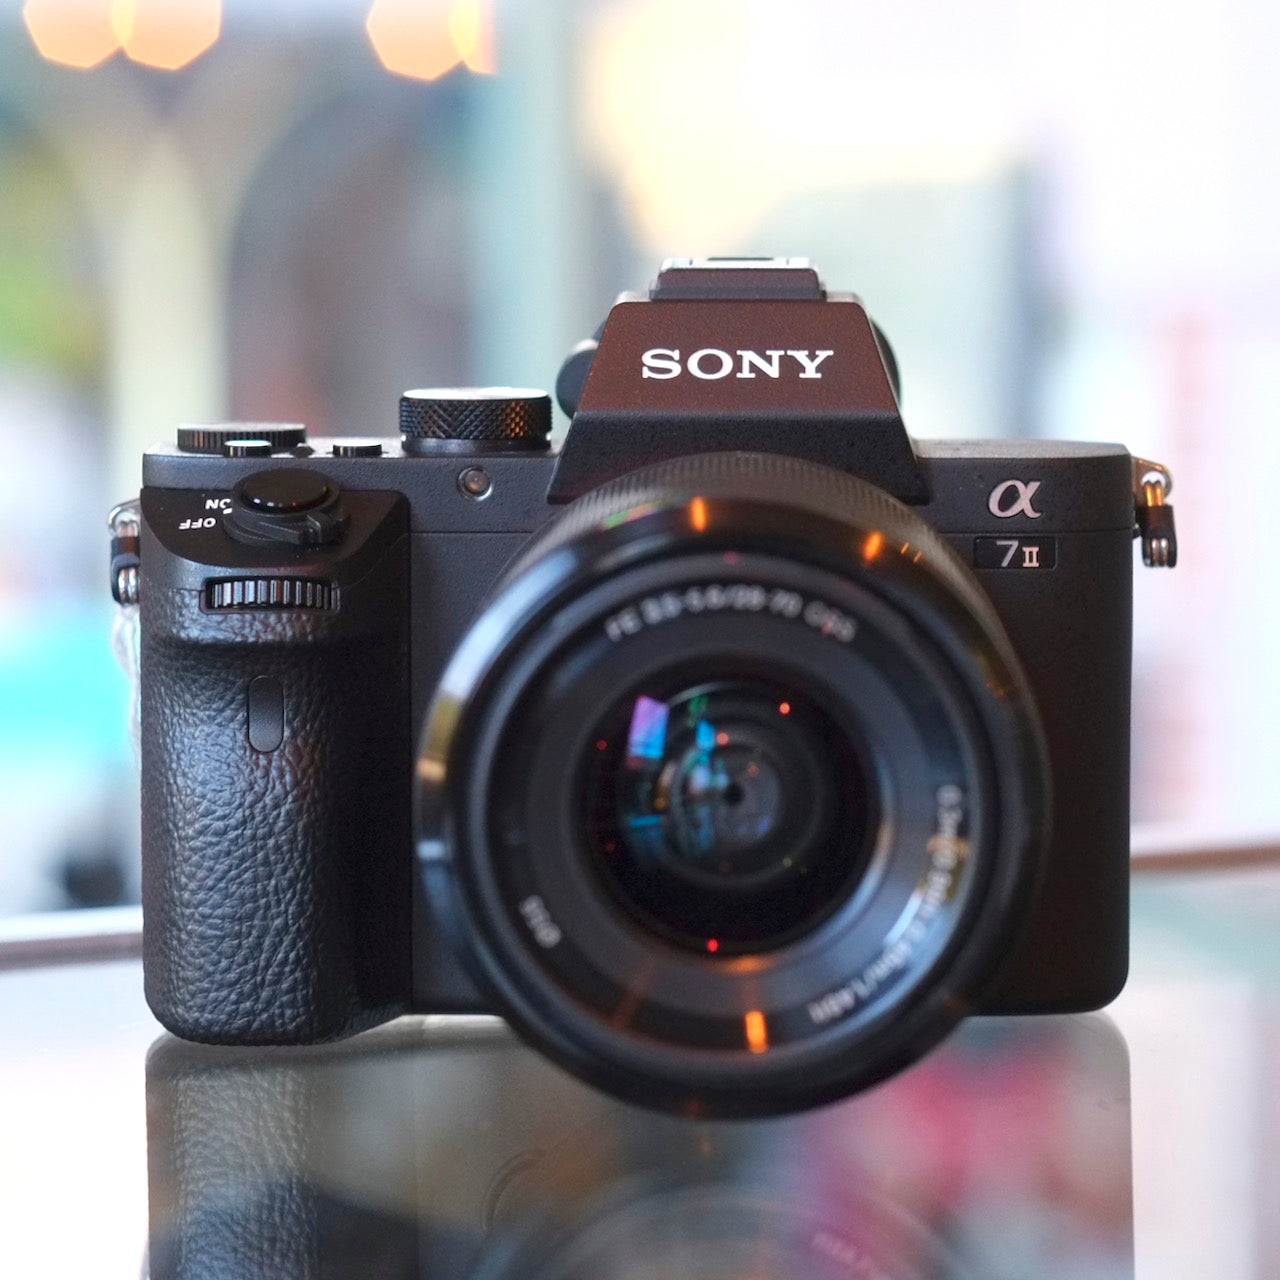 Sony A7 II with FE 28-70mm f3.5-4.5 OSS